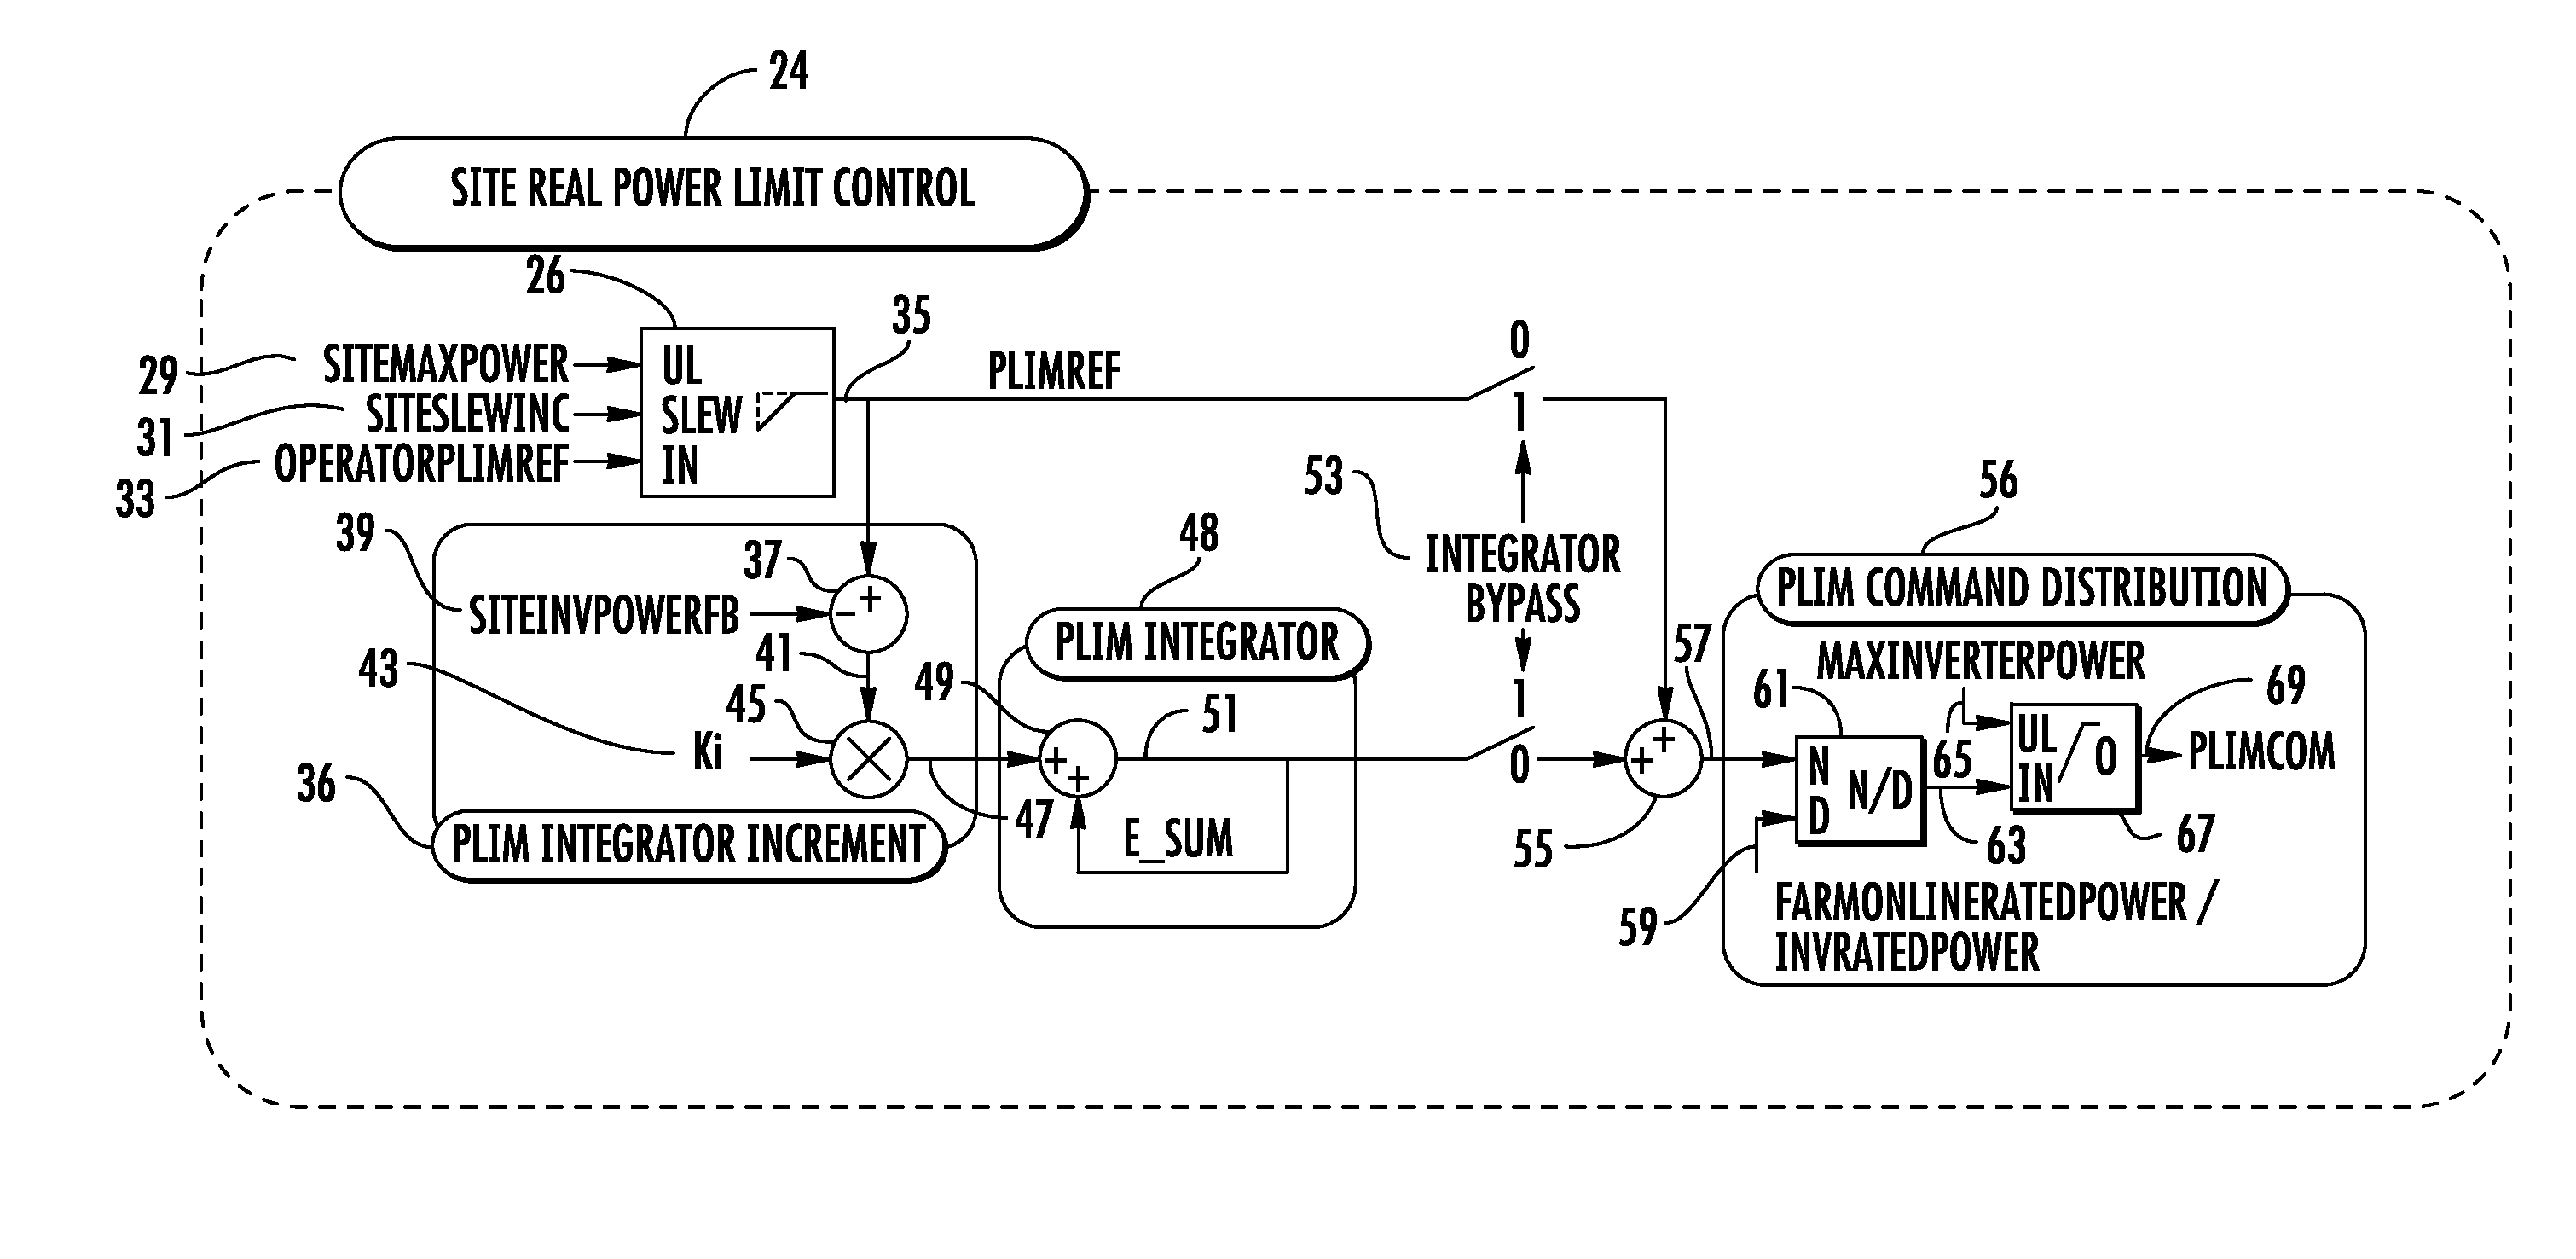 Methods, systems, computer program products, and devices for renewable energy site power limit control